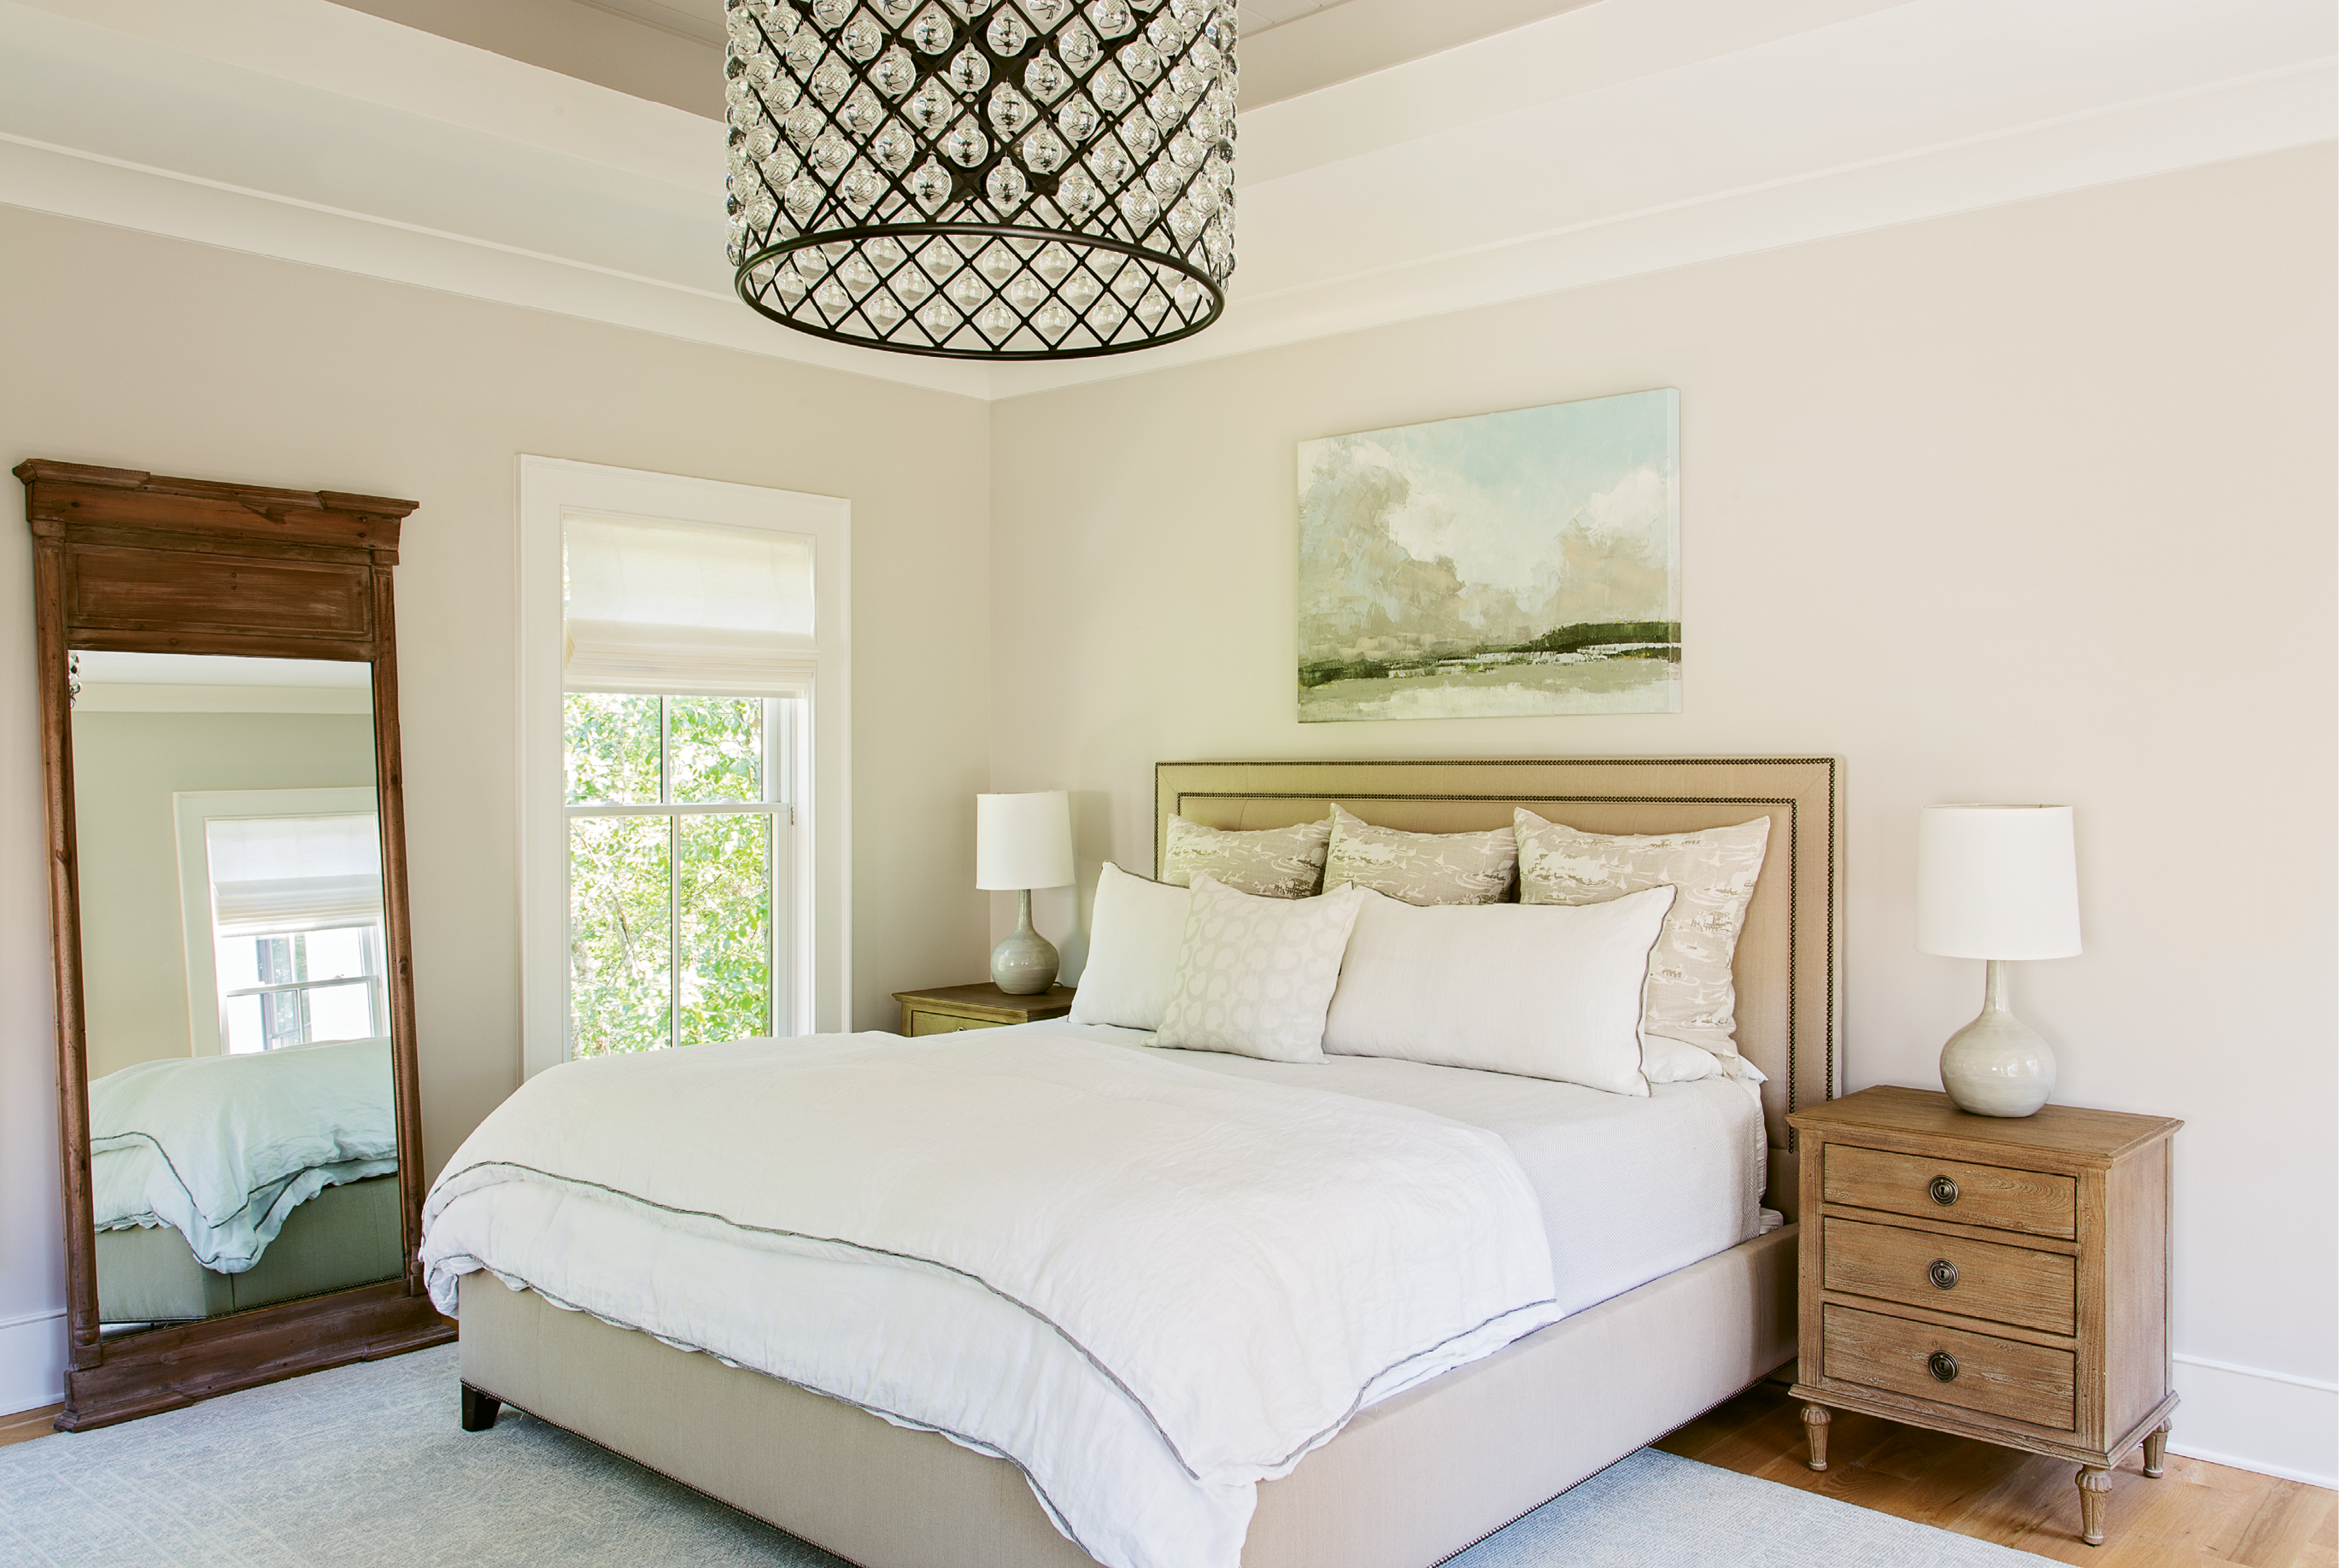 Dreamy Drama: “It’s my favorite thing in the house,” says Theresa of the big, dramatic light fixture in the master bedroom, a constellation of mini-globes reflecting light in dazzling gentleness. “Keeping the décor neutral and simple allows for going big and making statements with the light fixtures,” notes Lenox.